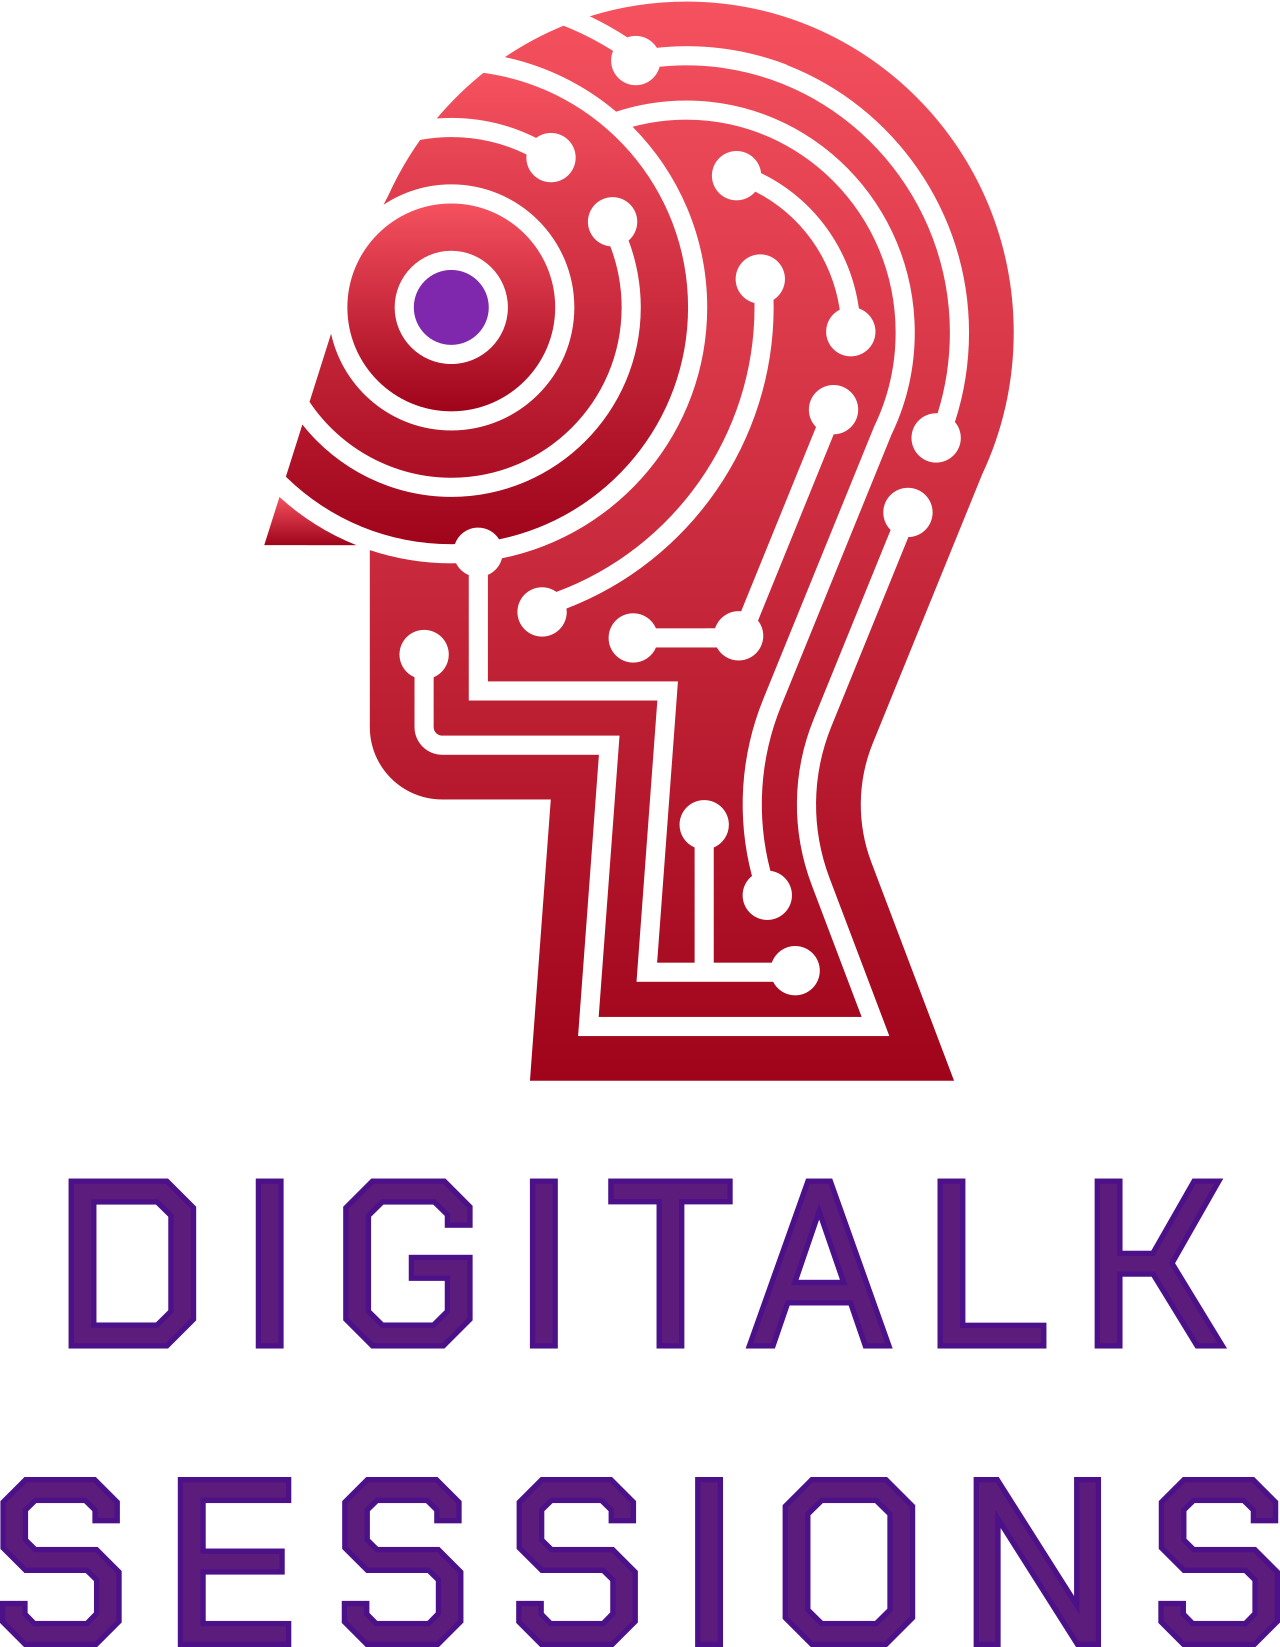 Digitalk
Sessions's web page